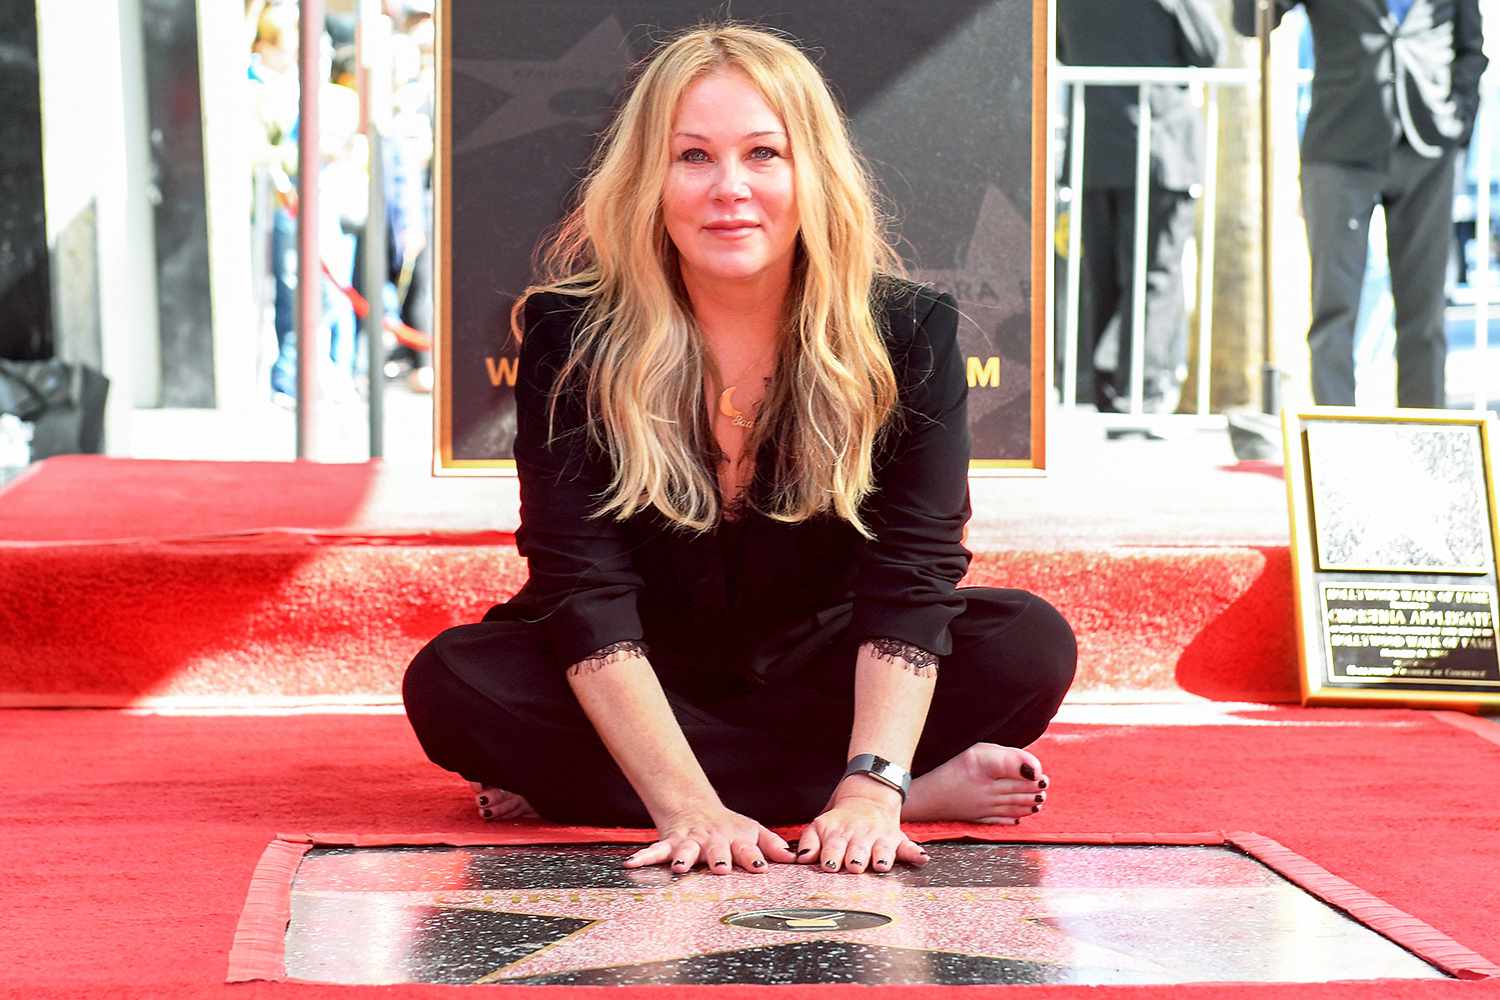 Christina Applegate poses for photos with her newly unveiled Hollywood Walk of Fame star in Hollywood, California, on November 14, 2022.